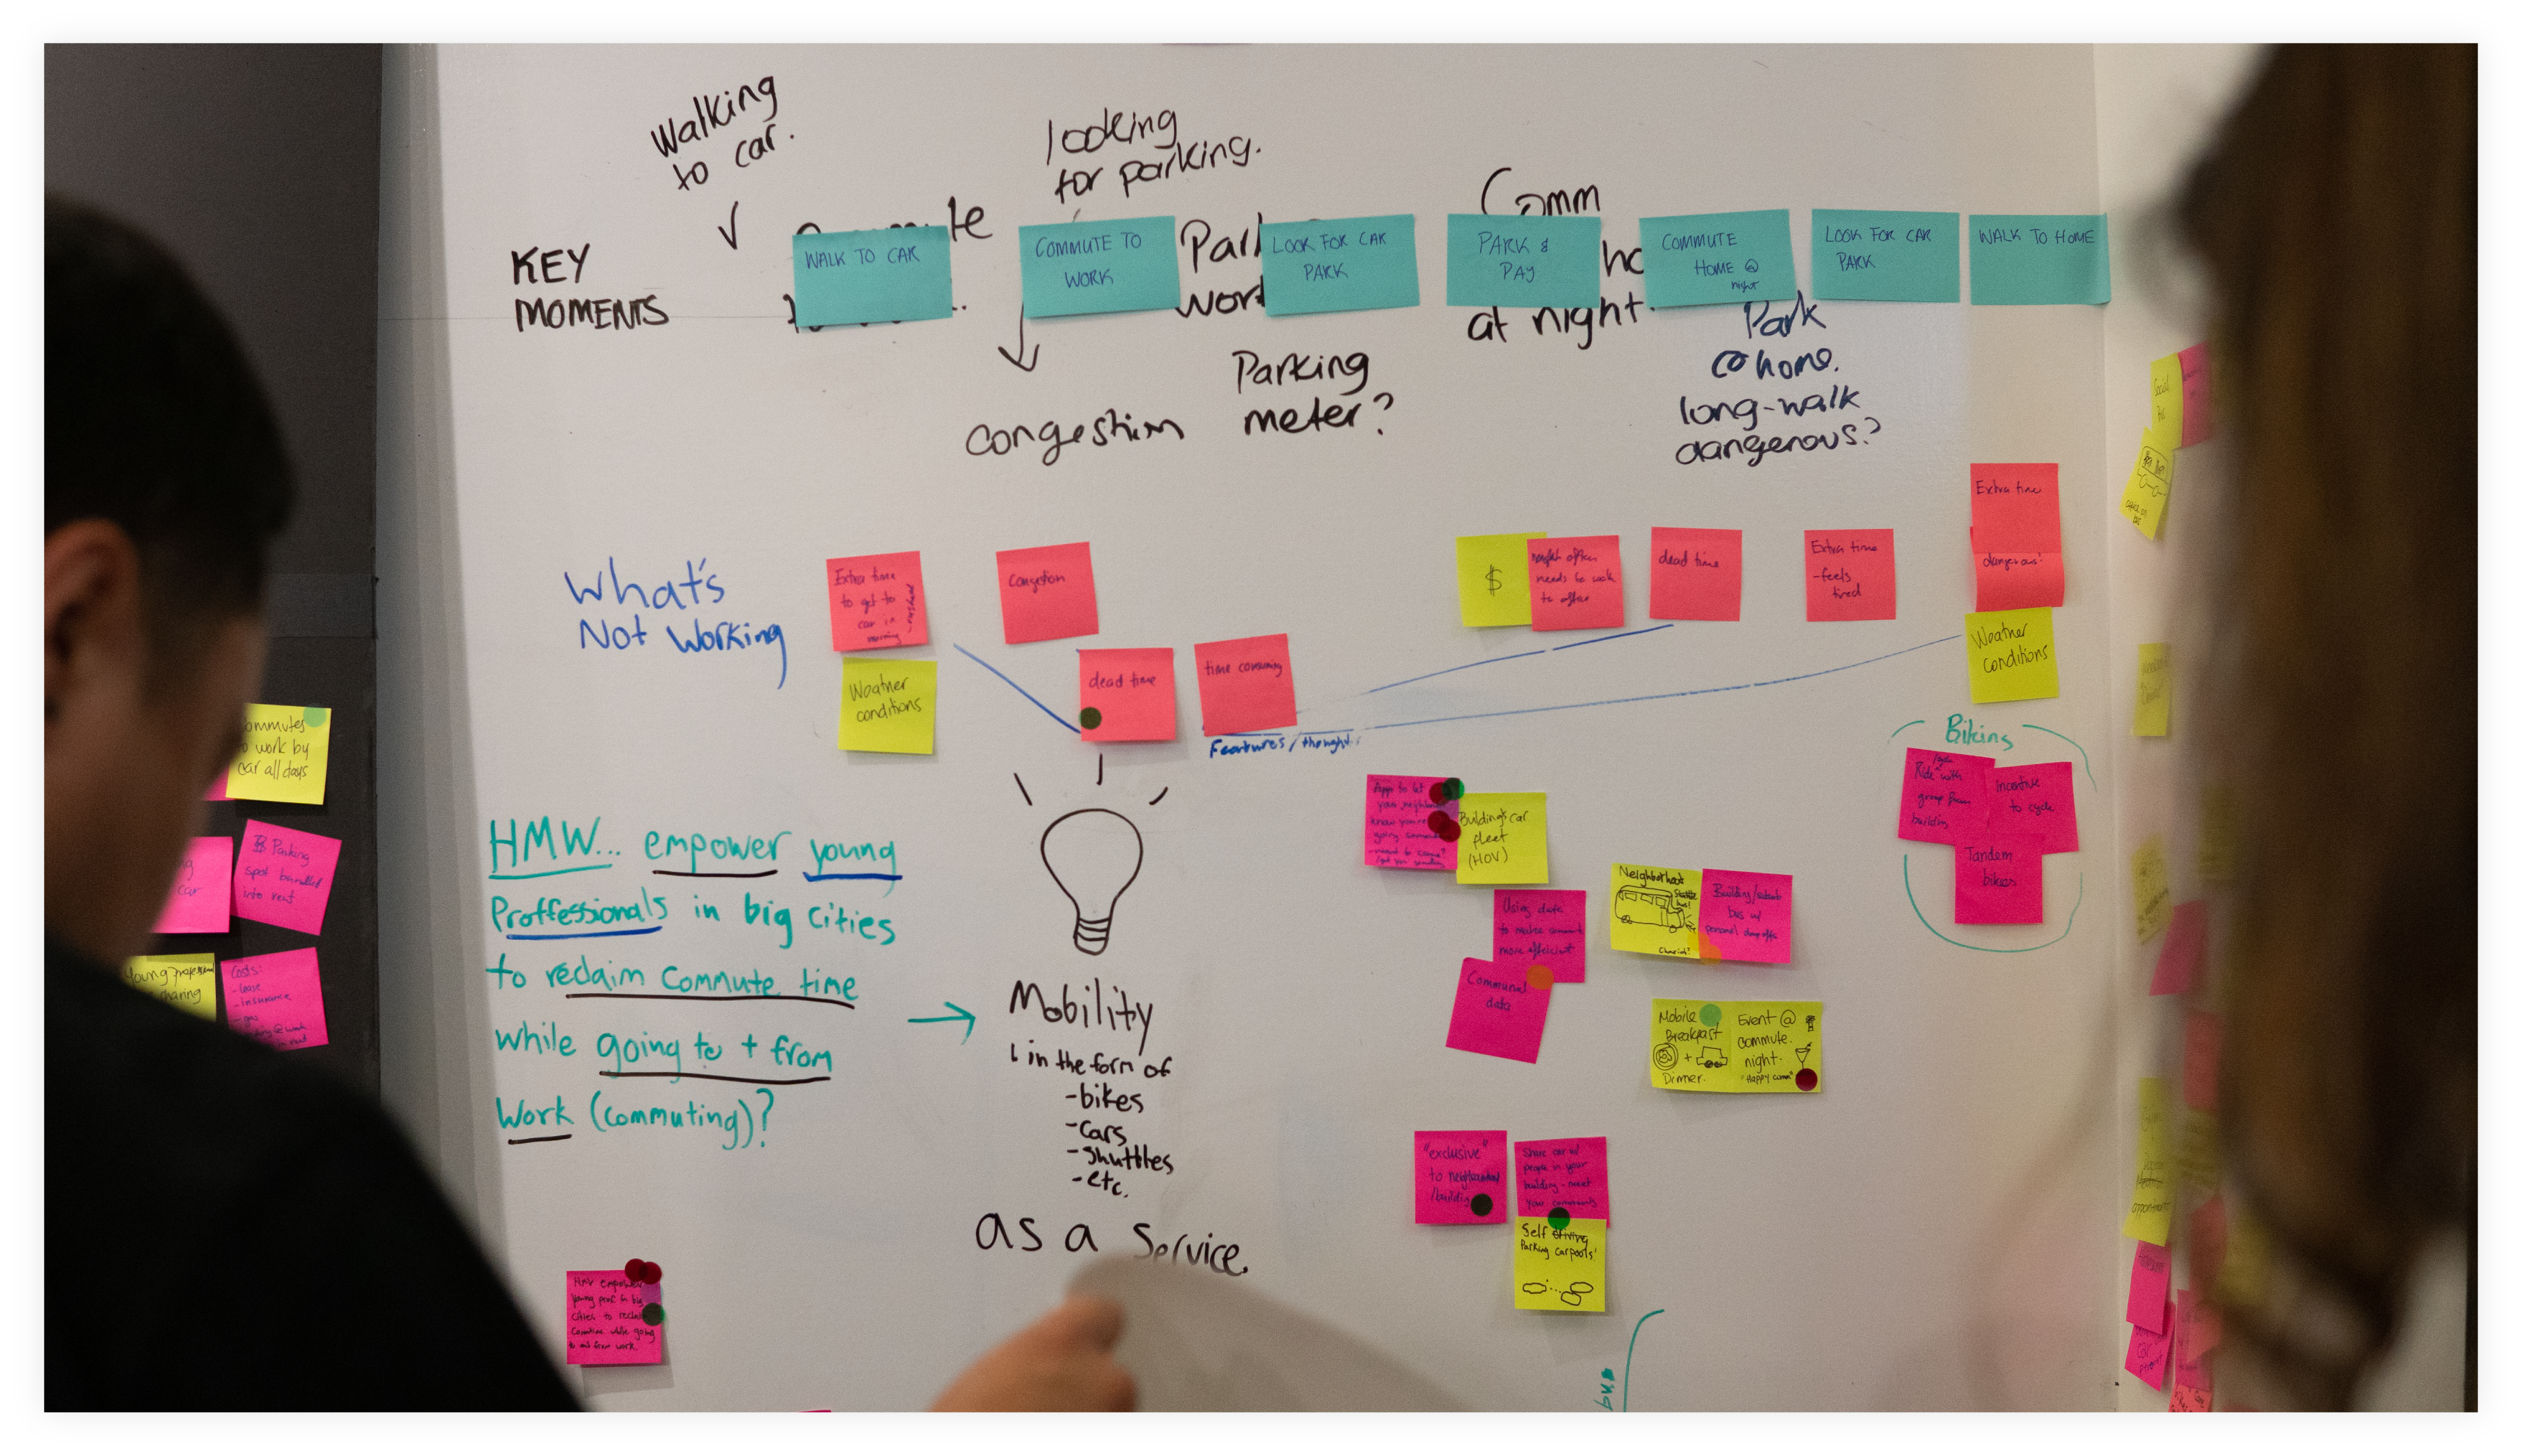 Brainstorming and User Journey